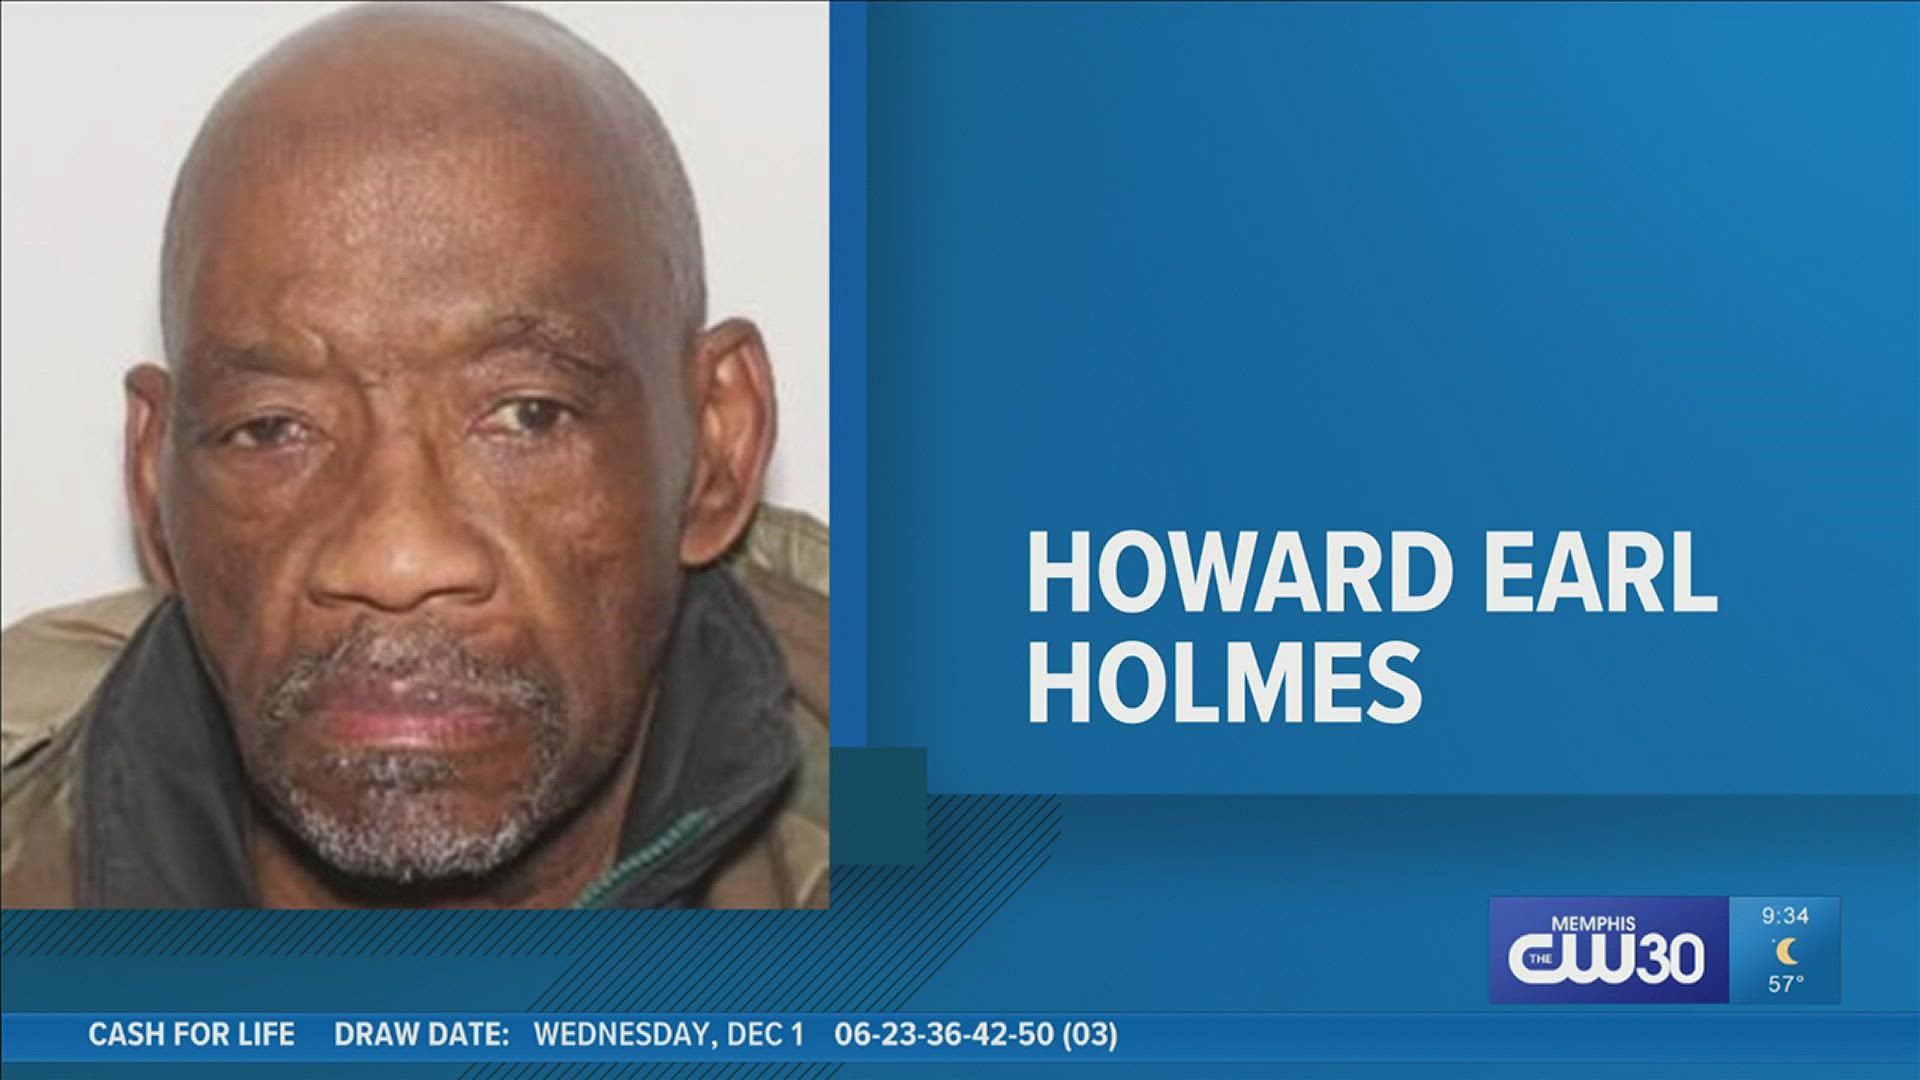 According to Arkansas State Police, Howard Earl Homes was found in a shallow drainage ditch Sunday between Front and Ash streets in Wynne.